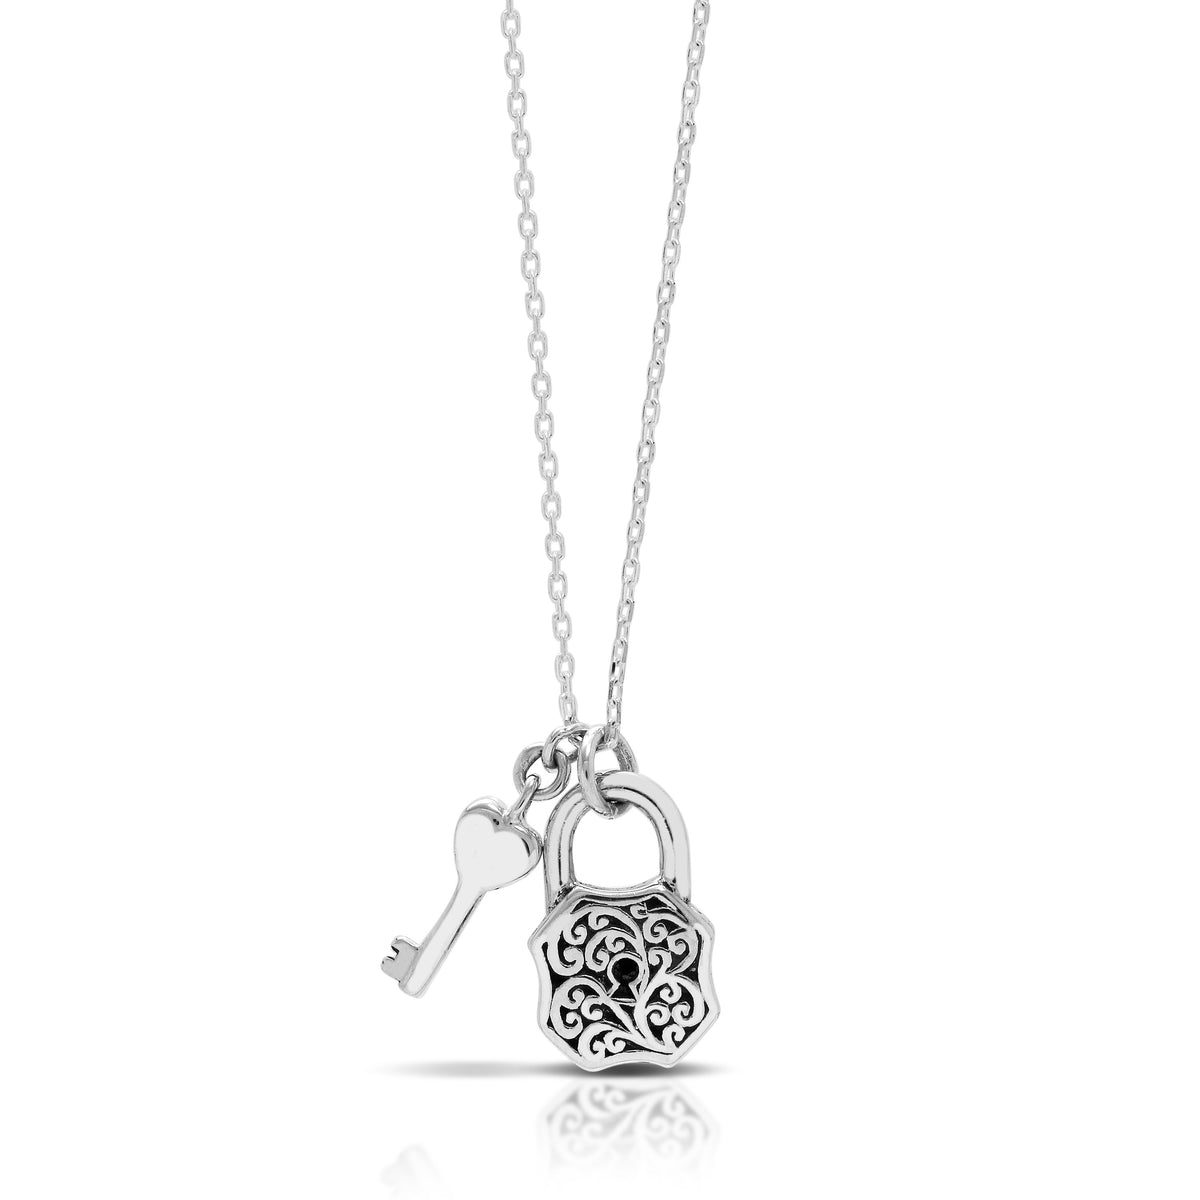 Classic Signature Scroll Stylised Padlock Pendant with Hanging Key Necklace